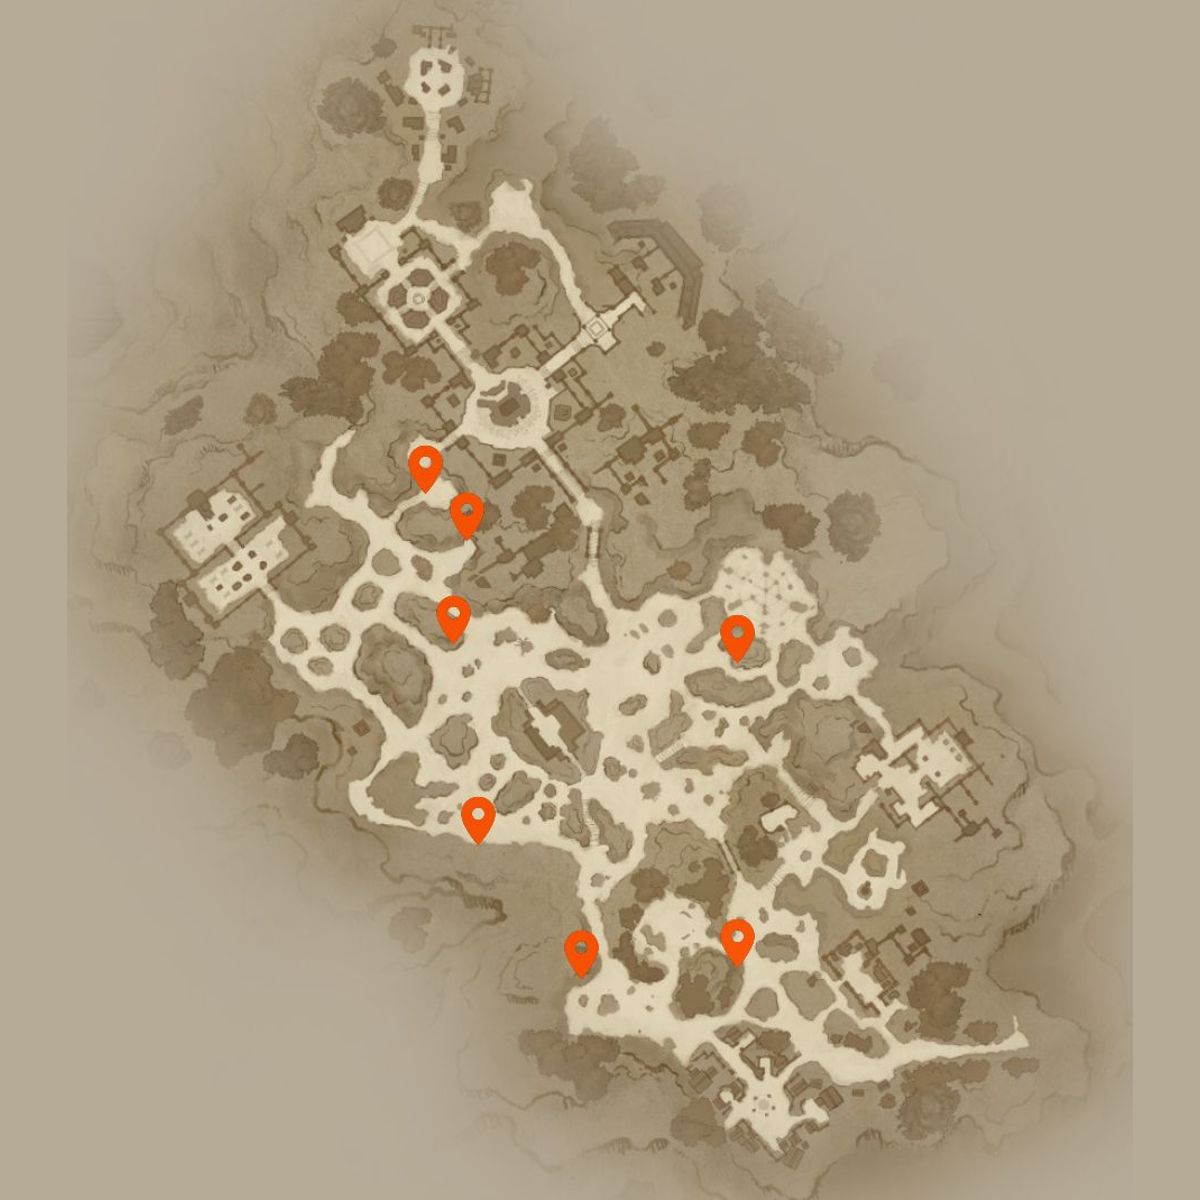 All Diablo Immortal Hidden Lair locations and how to find them